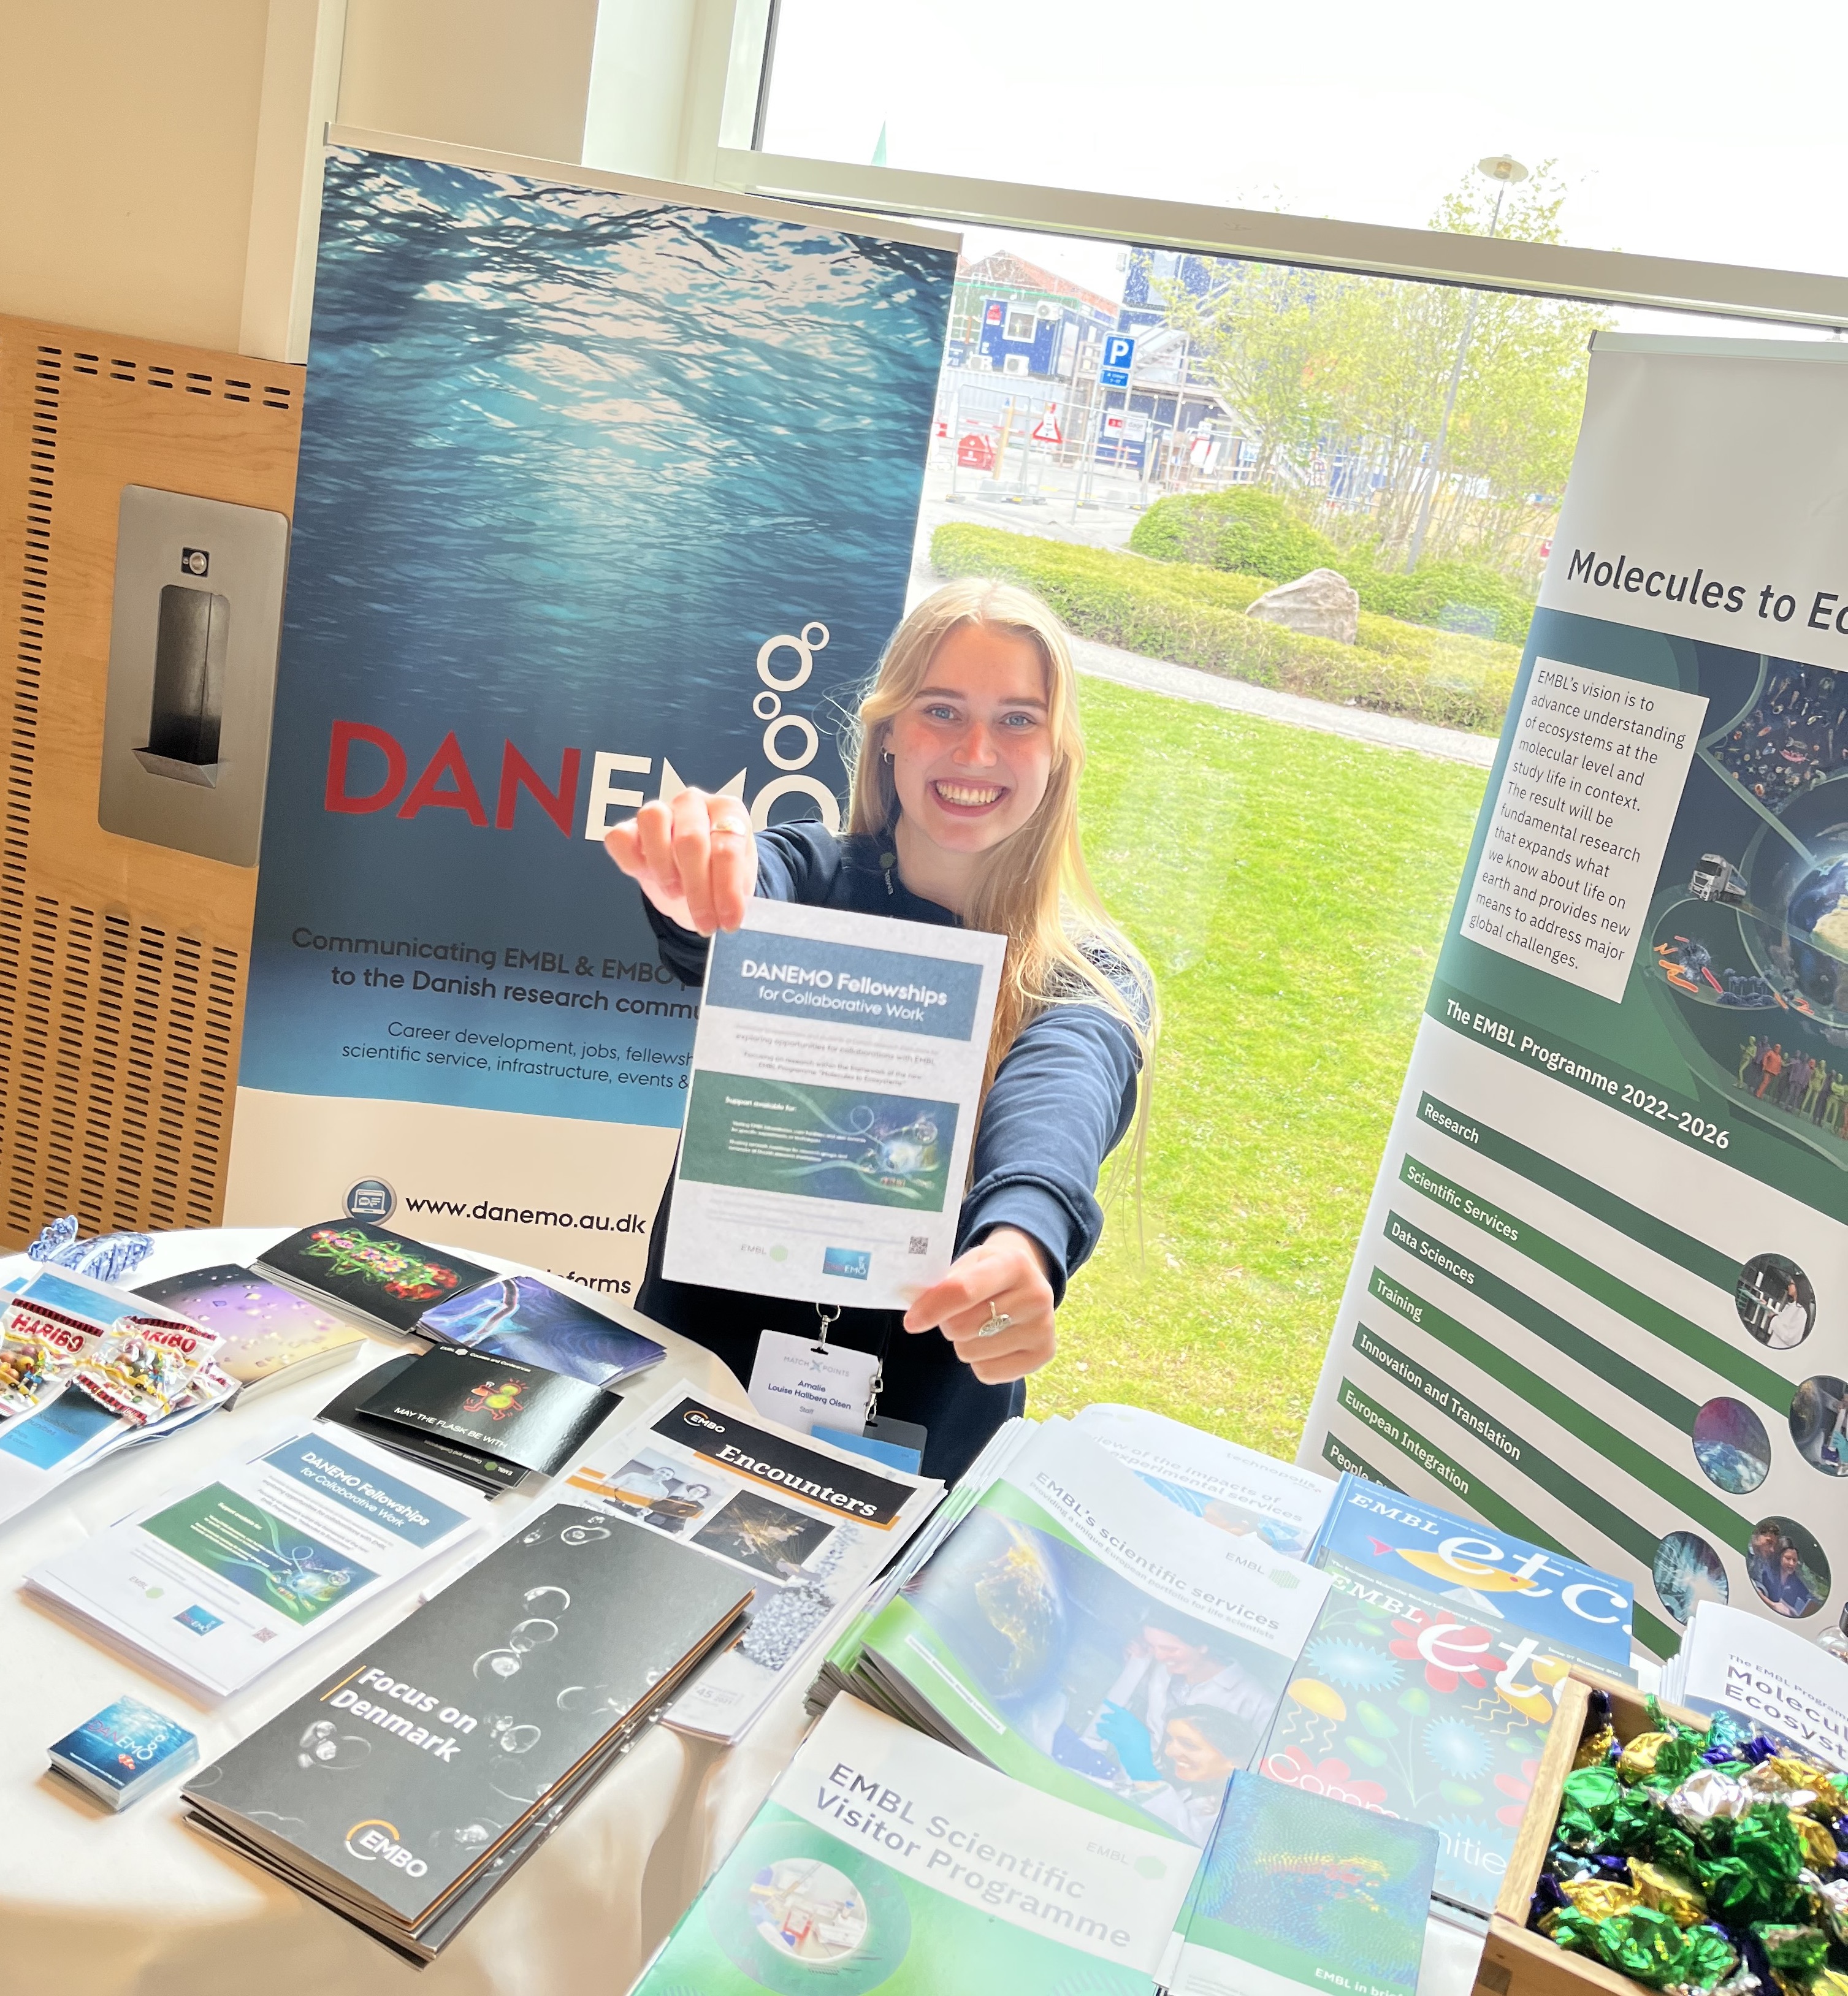 A woman sitting at a table giving out information about EMBL and EMBO